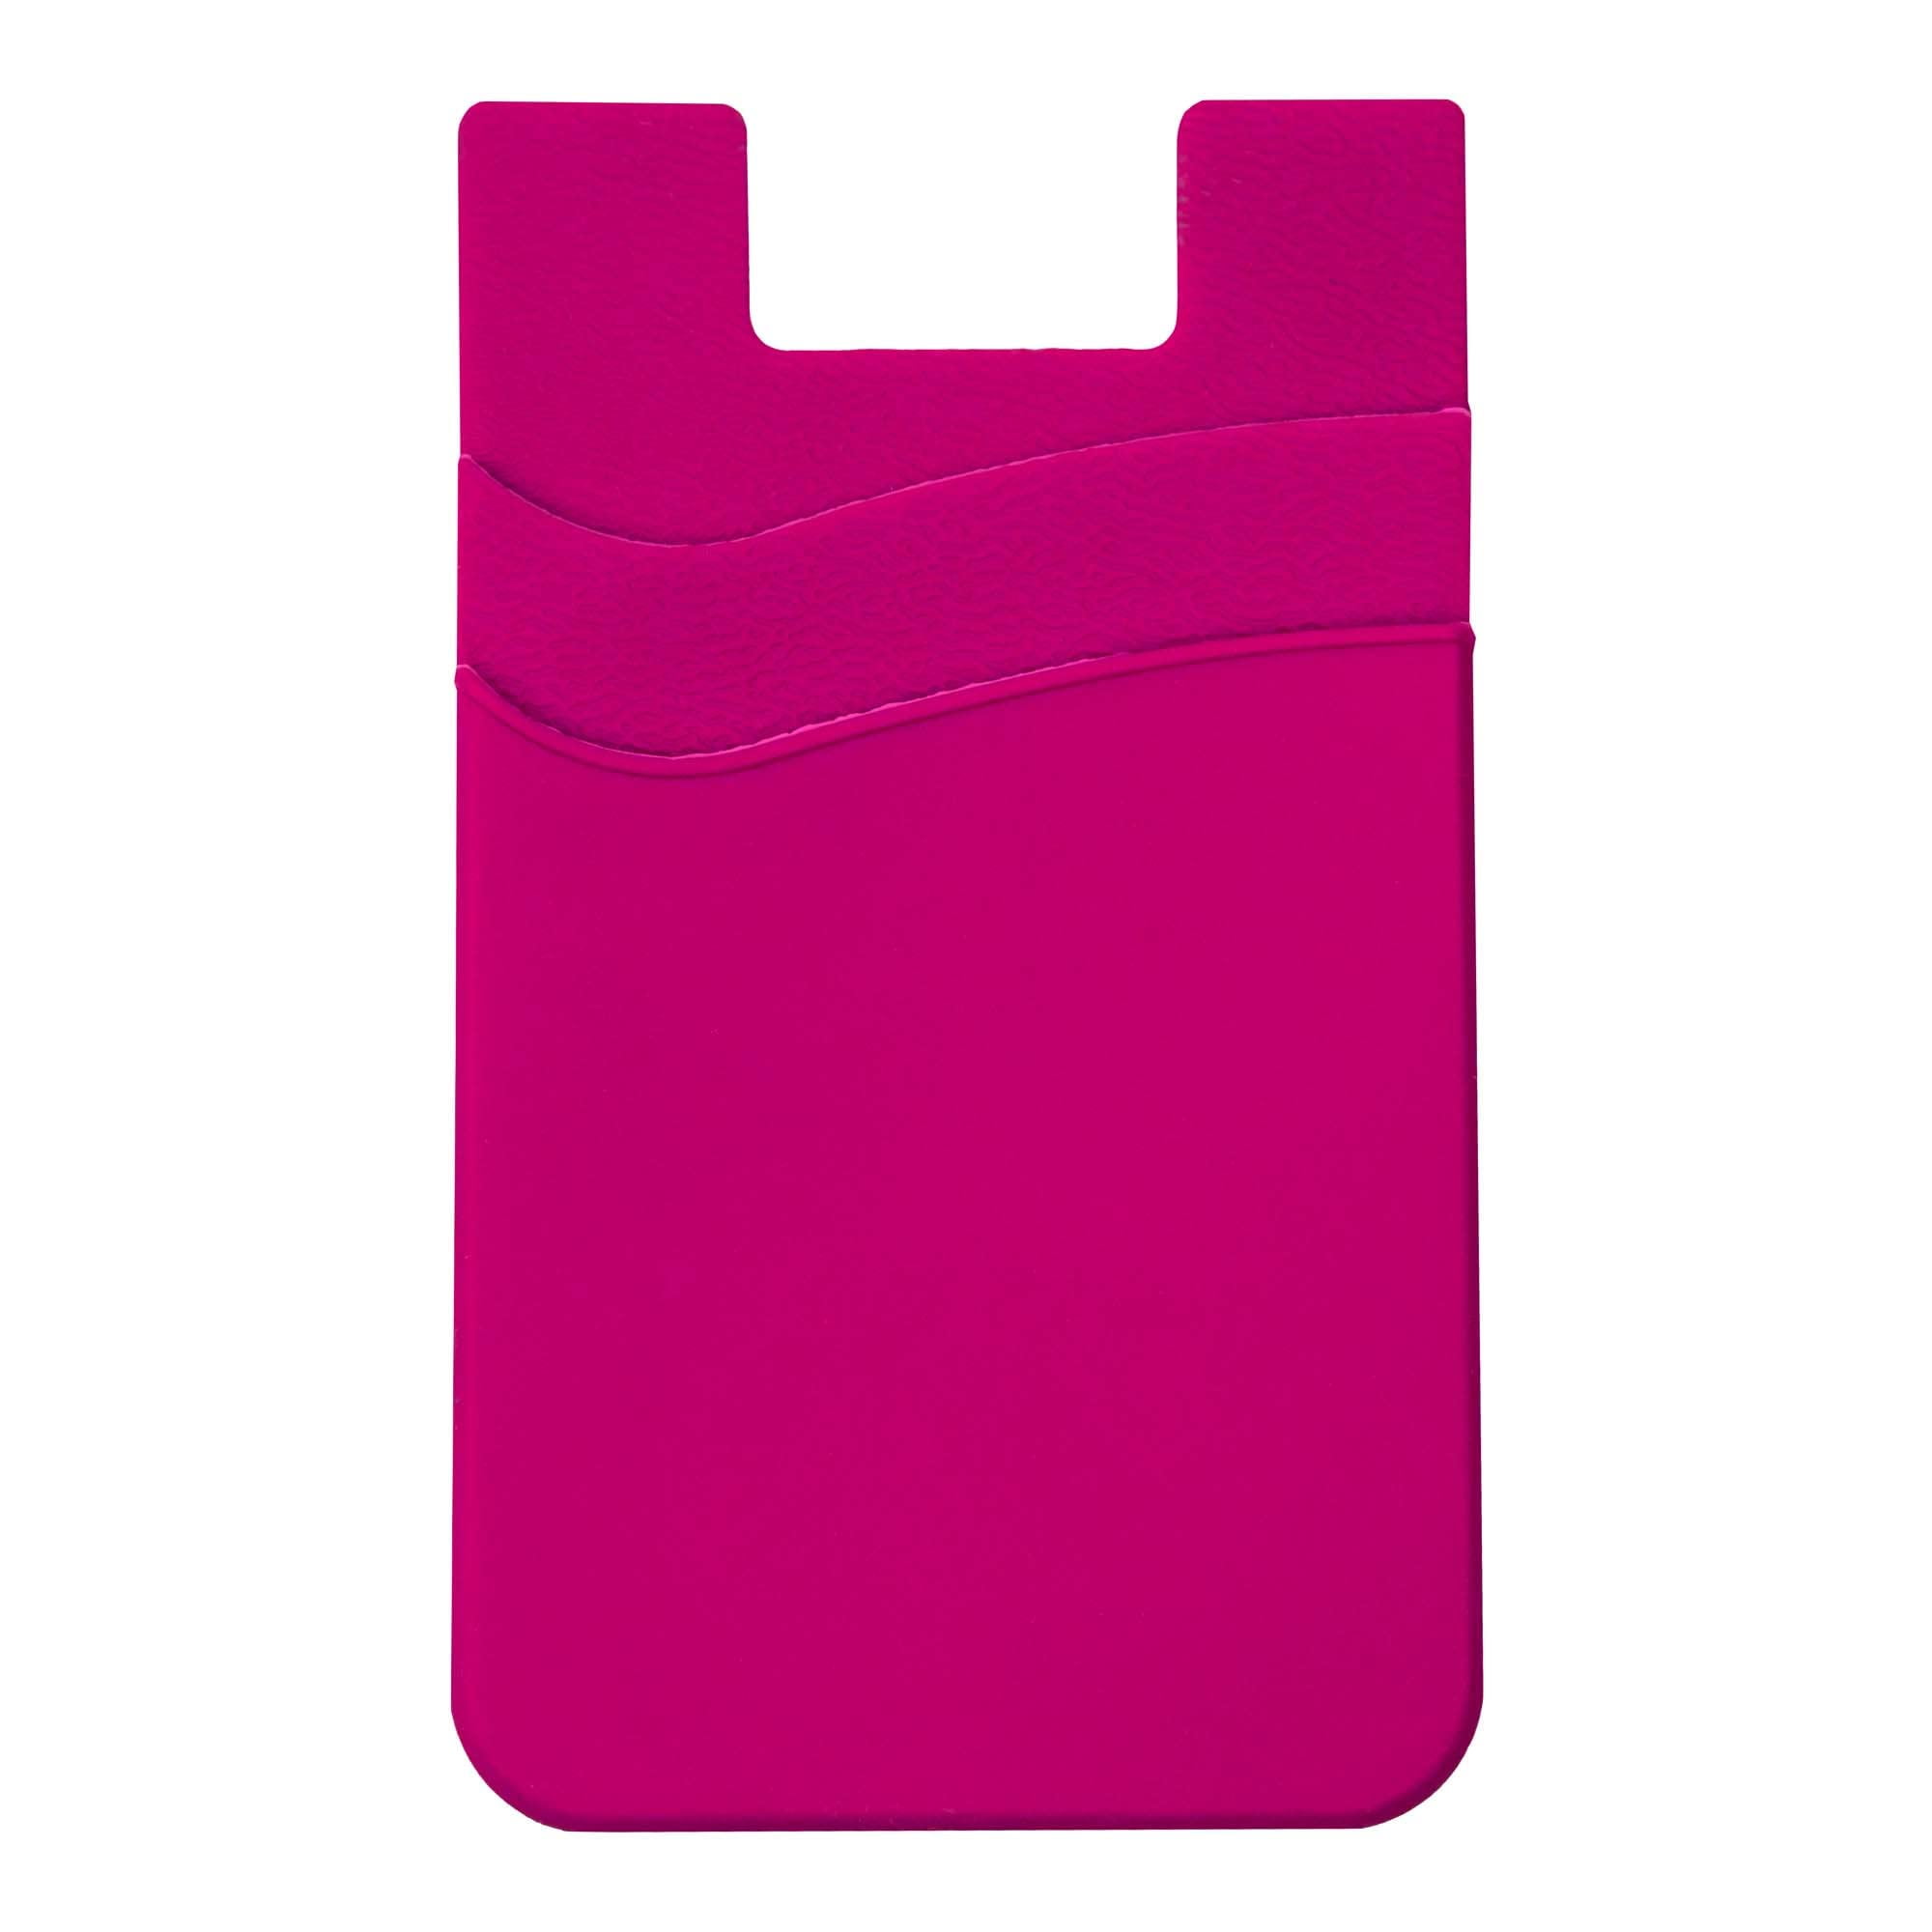 Premium Silicone Card Holder from $0.89